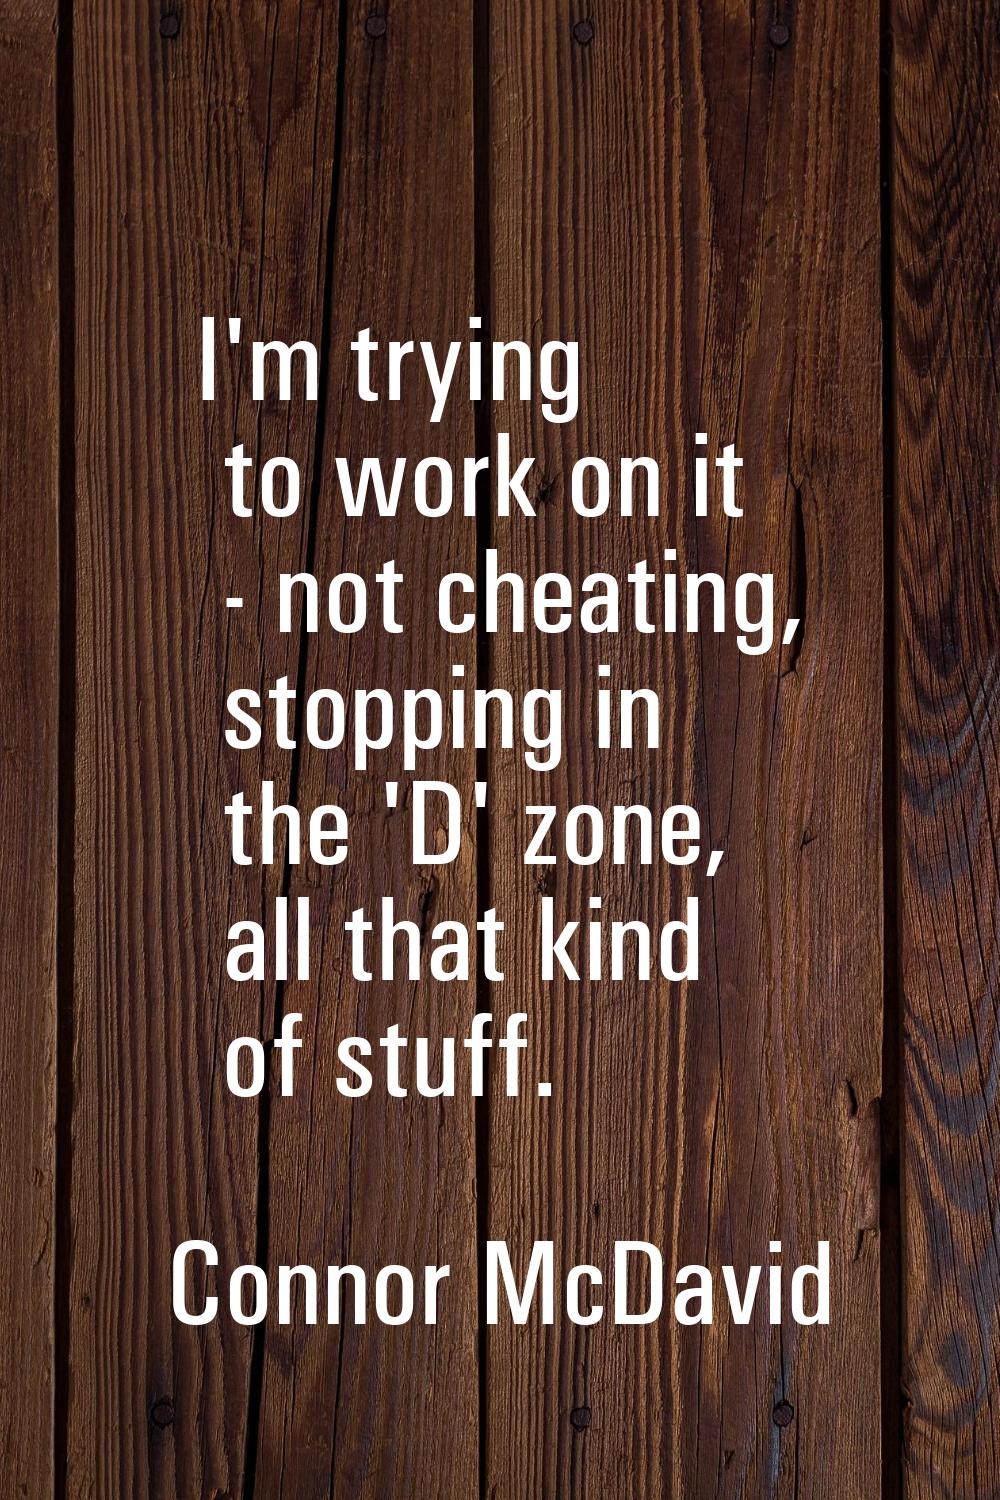 I'm trying to work on it - not cheating, stopping in the 'D' zone, all that kind of stuff.